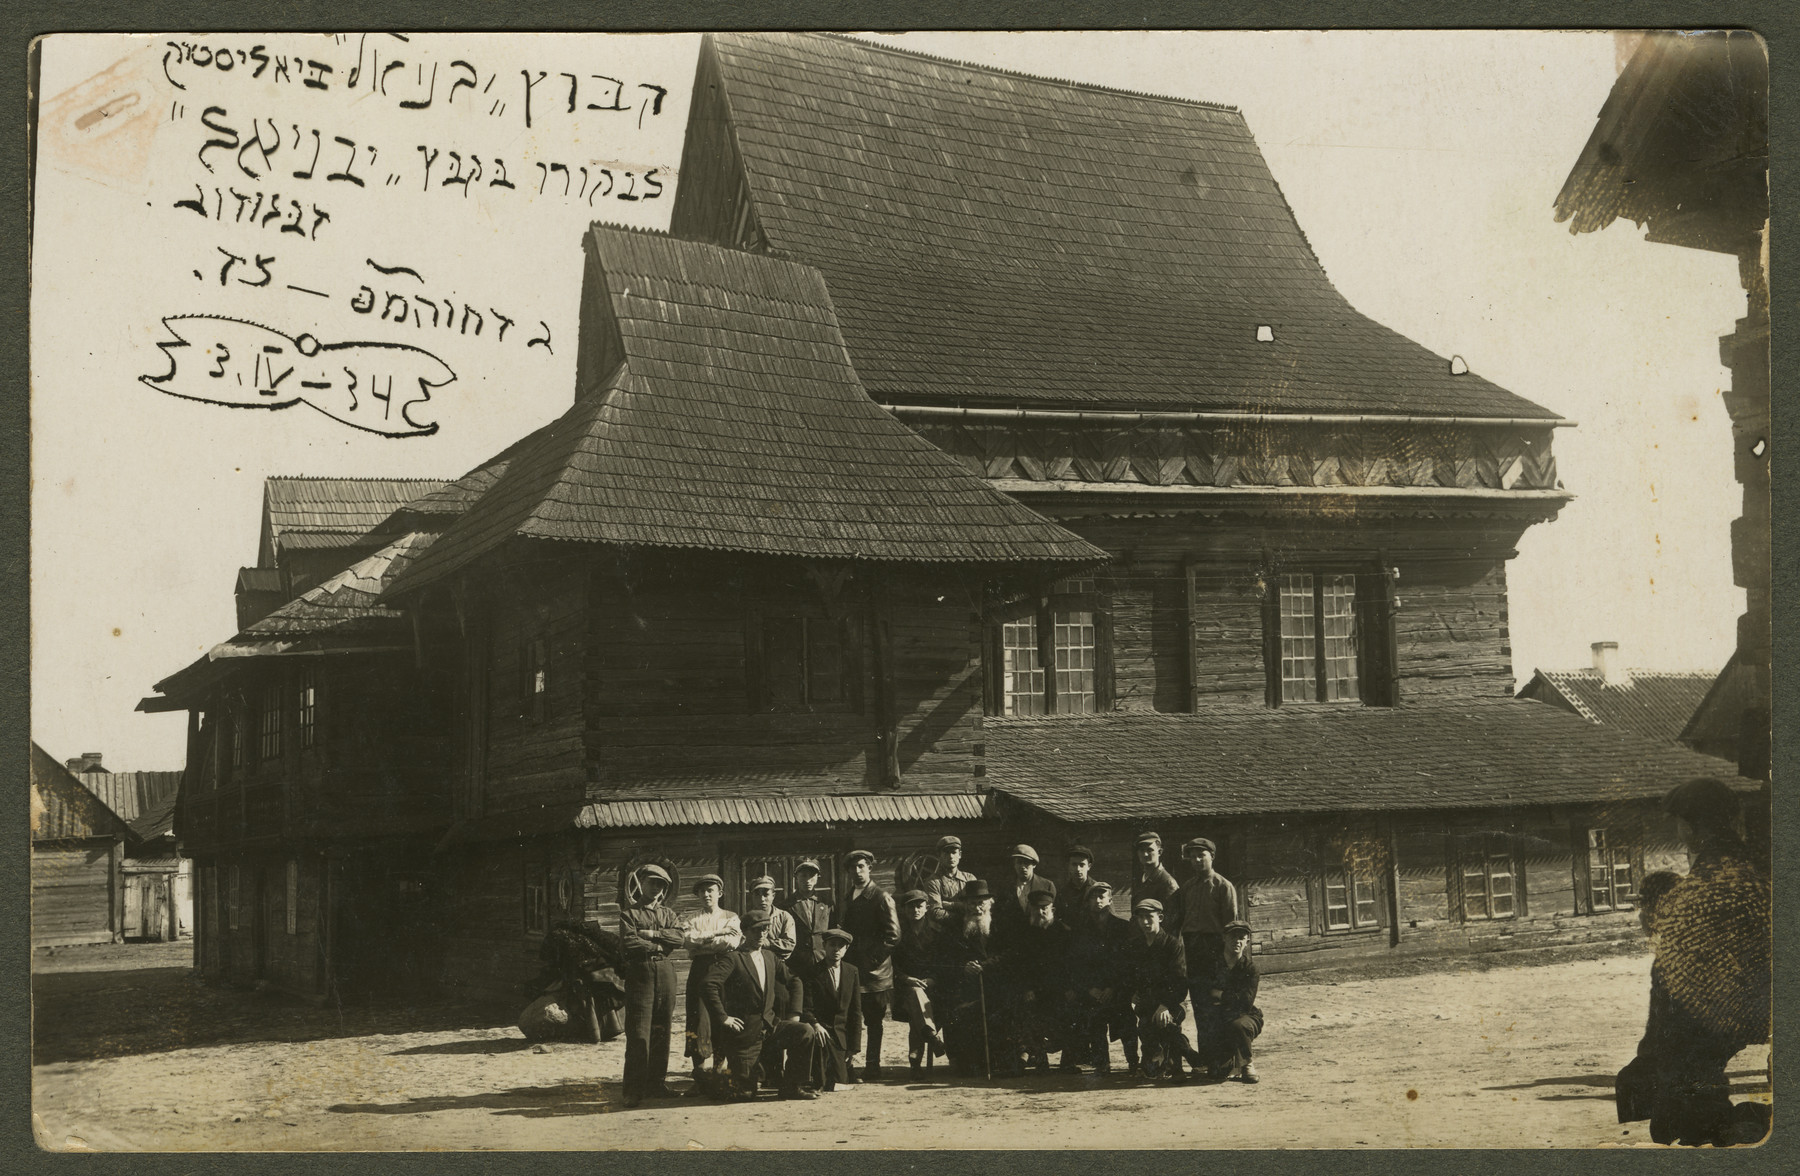 Members of the Hechalutz Mizrachi hachshara Yavniel pose outside a wooden synagogue in Zablodow.